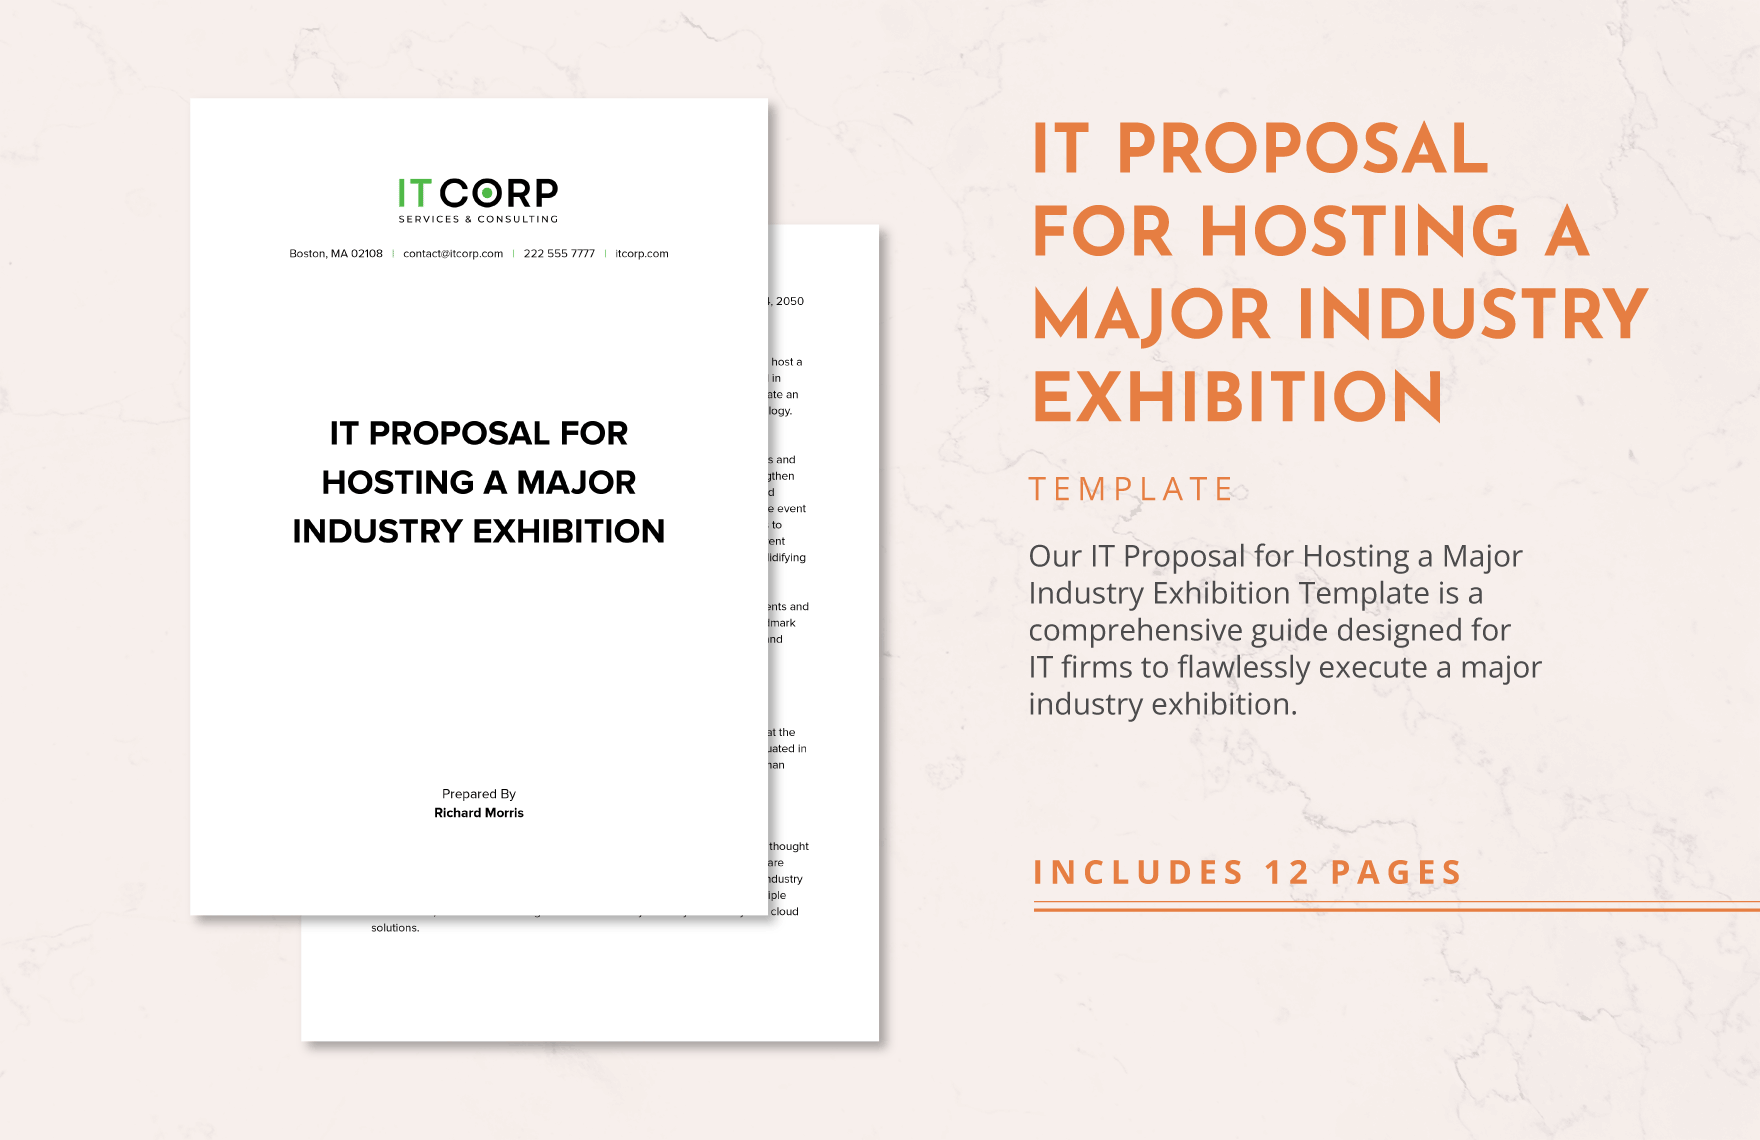 IT Proposal for Hosting a Major Industry Exhibition Template